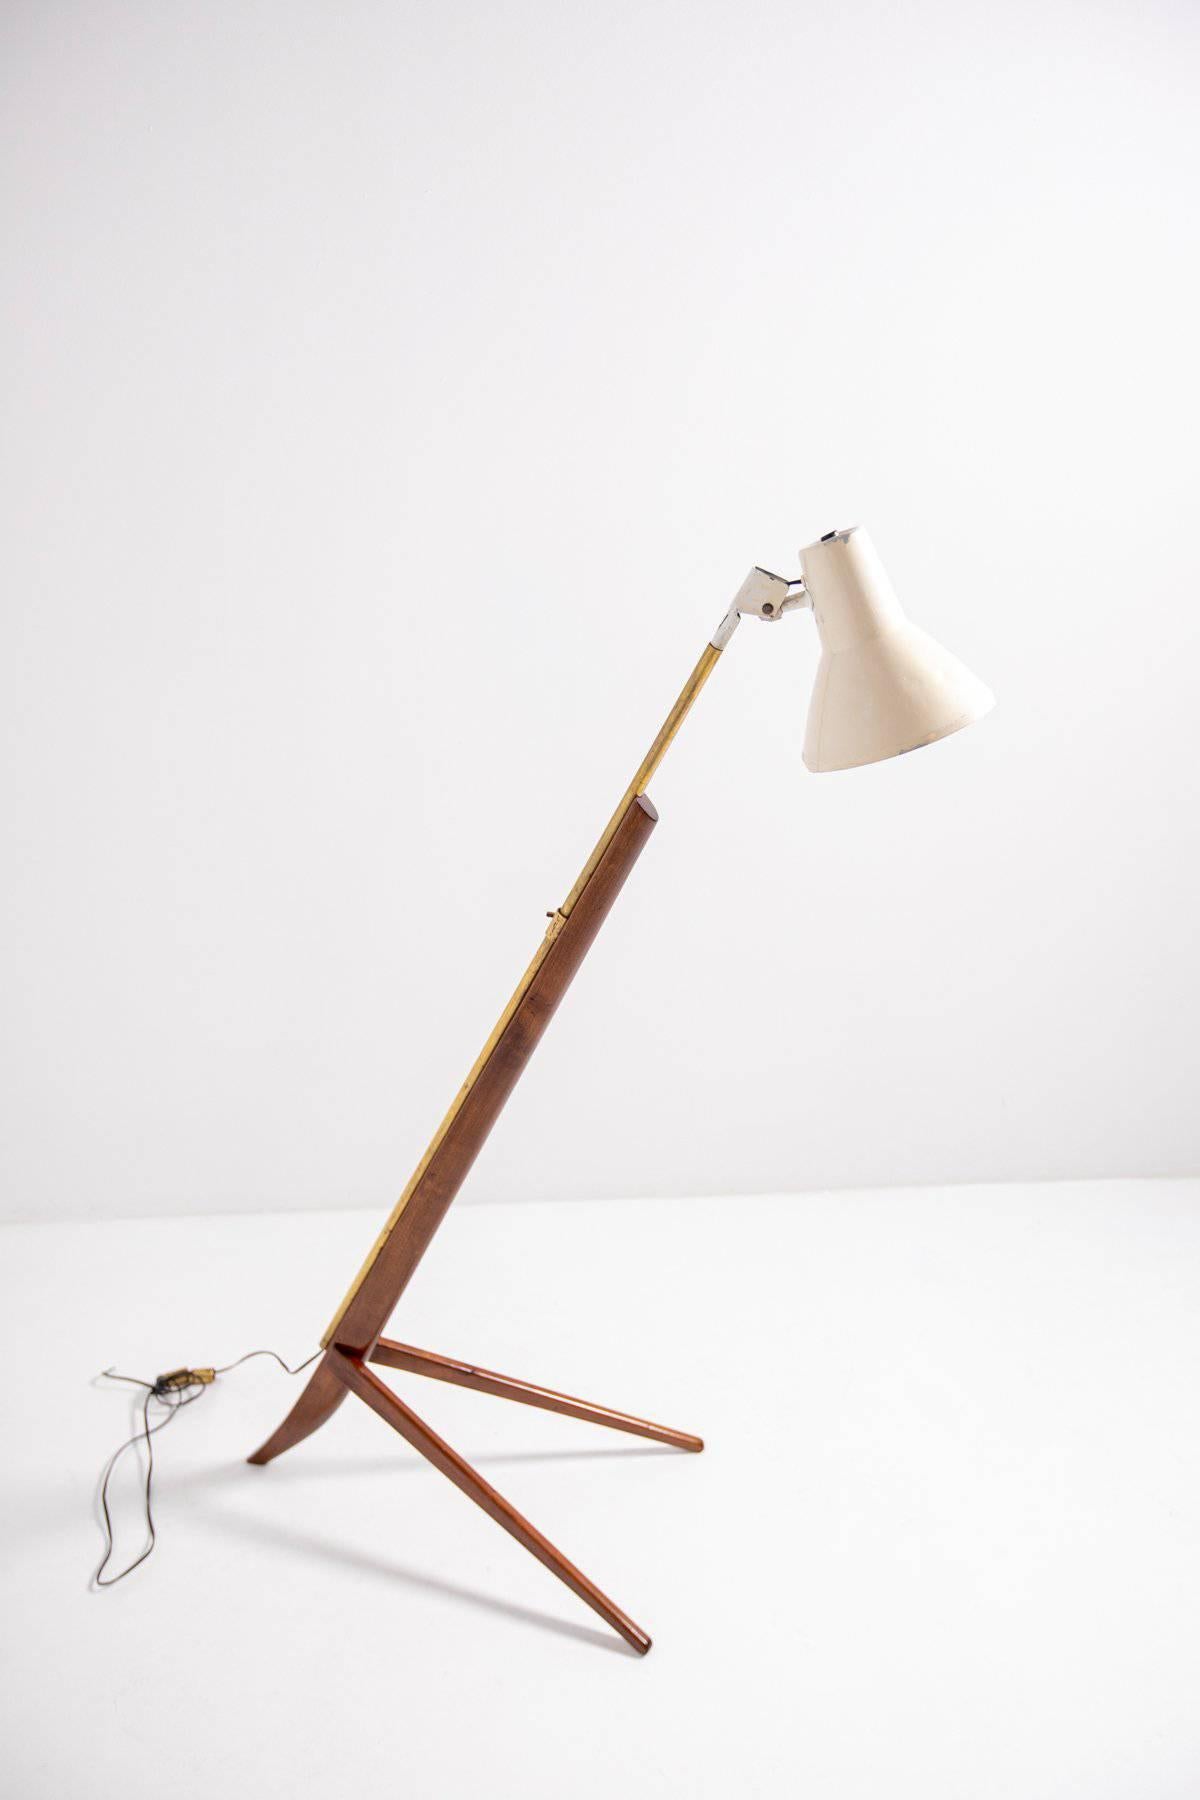 Italian Vintage Floor Lamp Attributed to Franco Albini, 1950s For Sale